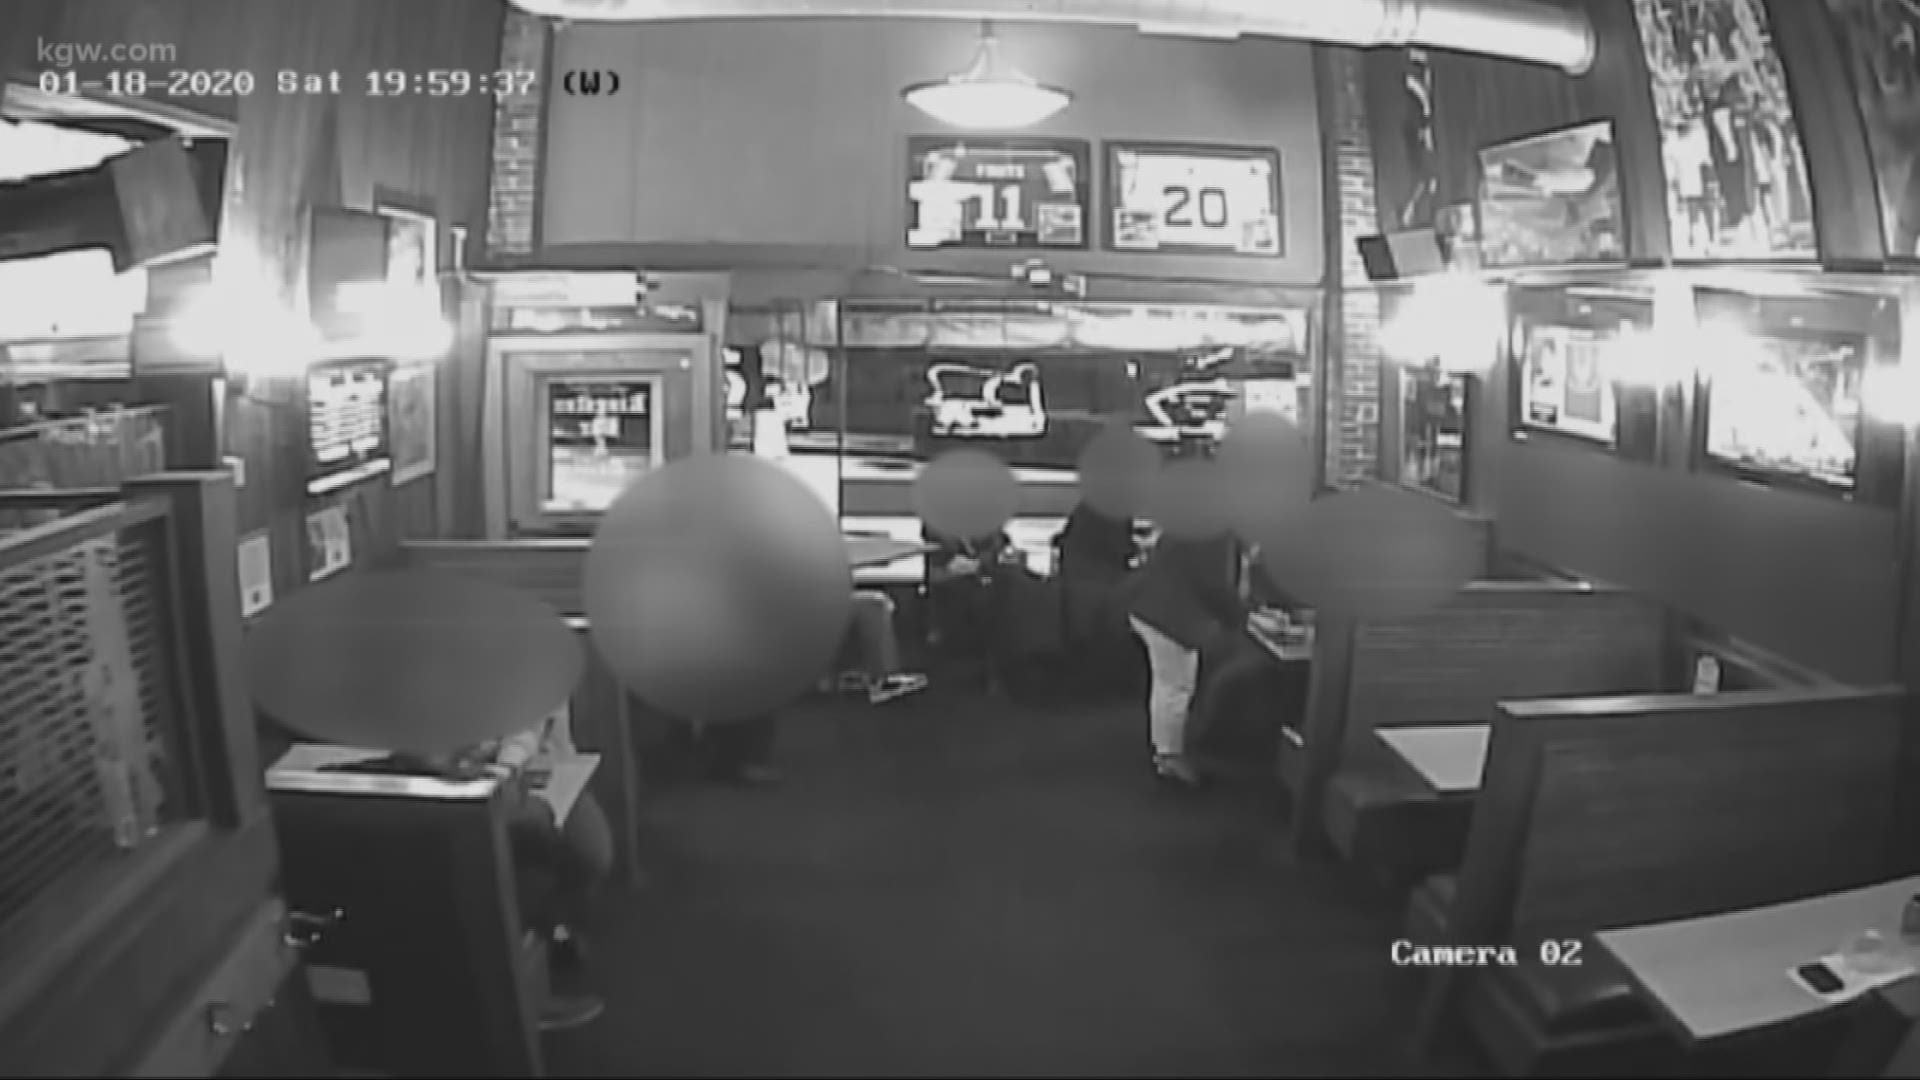 Stabbed by a stranger. New video shows the man accused of stabbing a Portland firefighter at a bar.